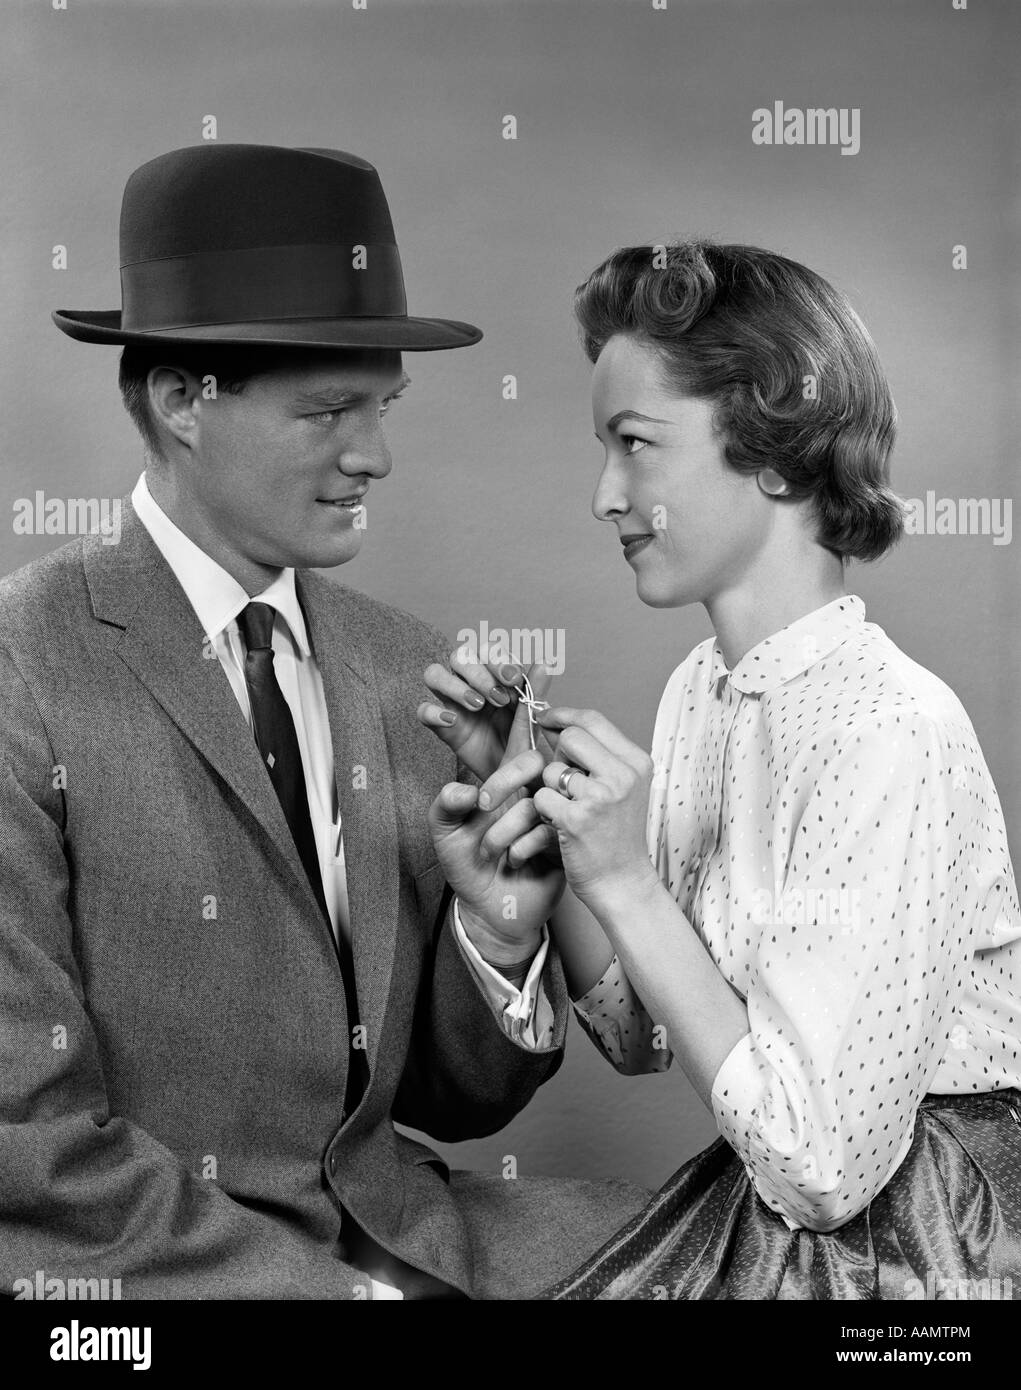 1950s COUPLE WOMAN TYING A STING IN A BOW AROUND MAN'S FINGER AS A REMINDER TO DO SOMETHING Stock Photo